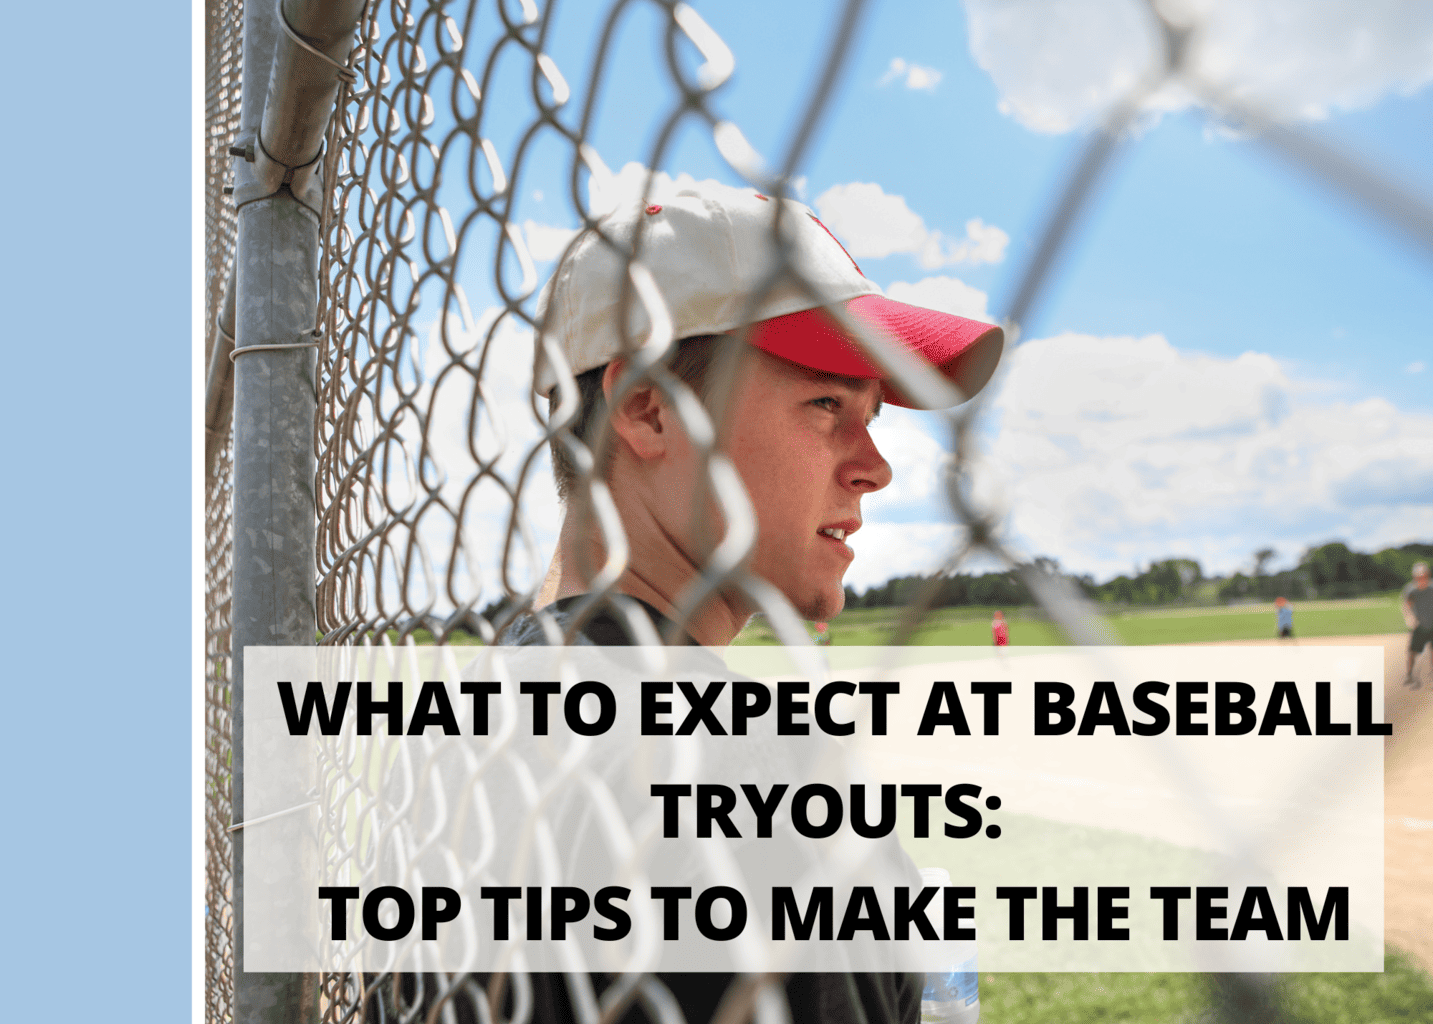 WHAT TO EXPECT AT BASEBALL TRYOUTS